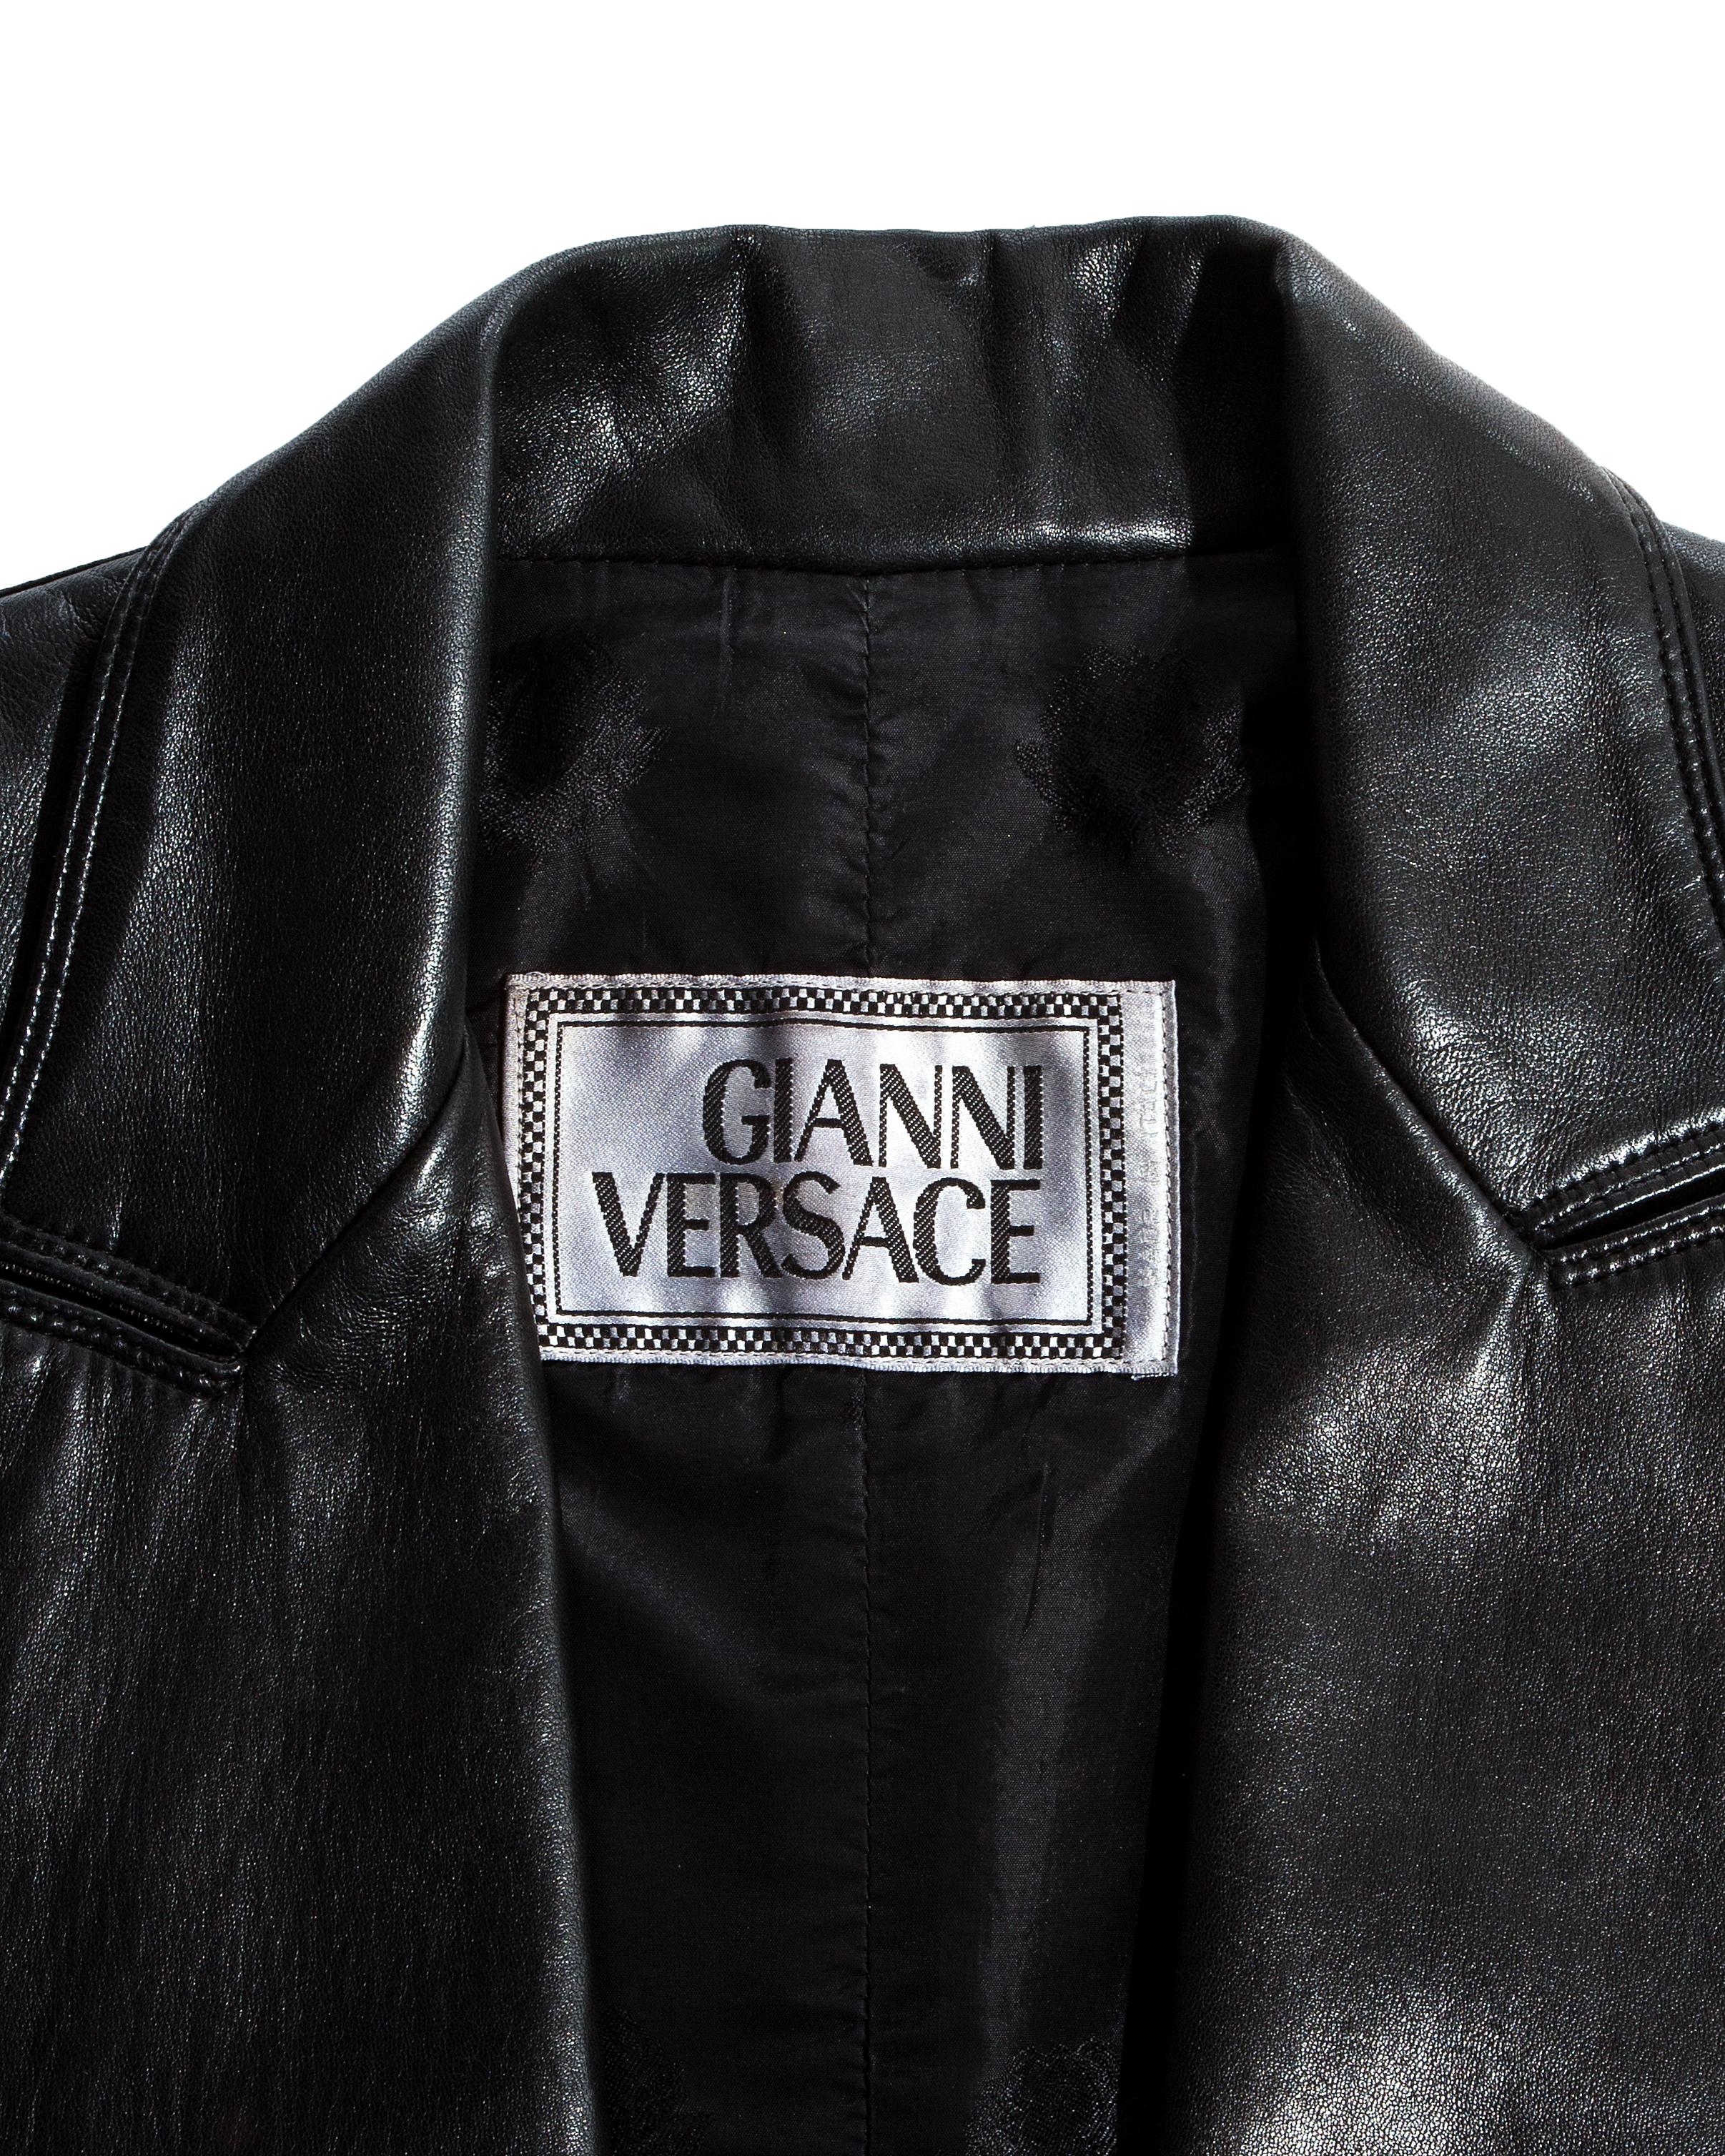 Gianni Versace black lambskin leather blazer jacket and skirt suit, fw 1997 For Sale 1